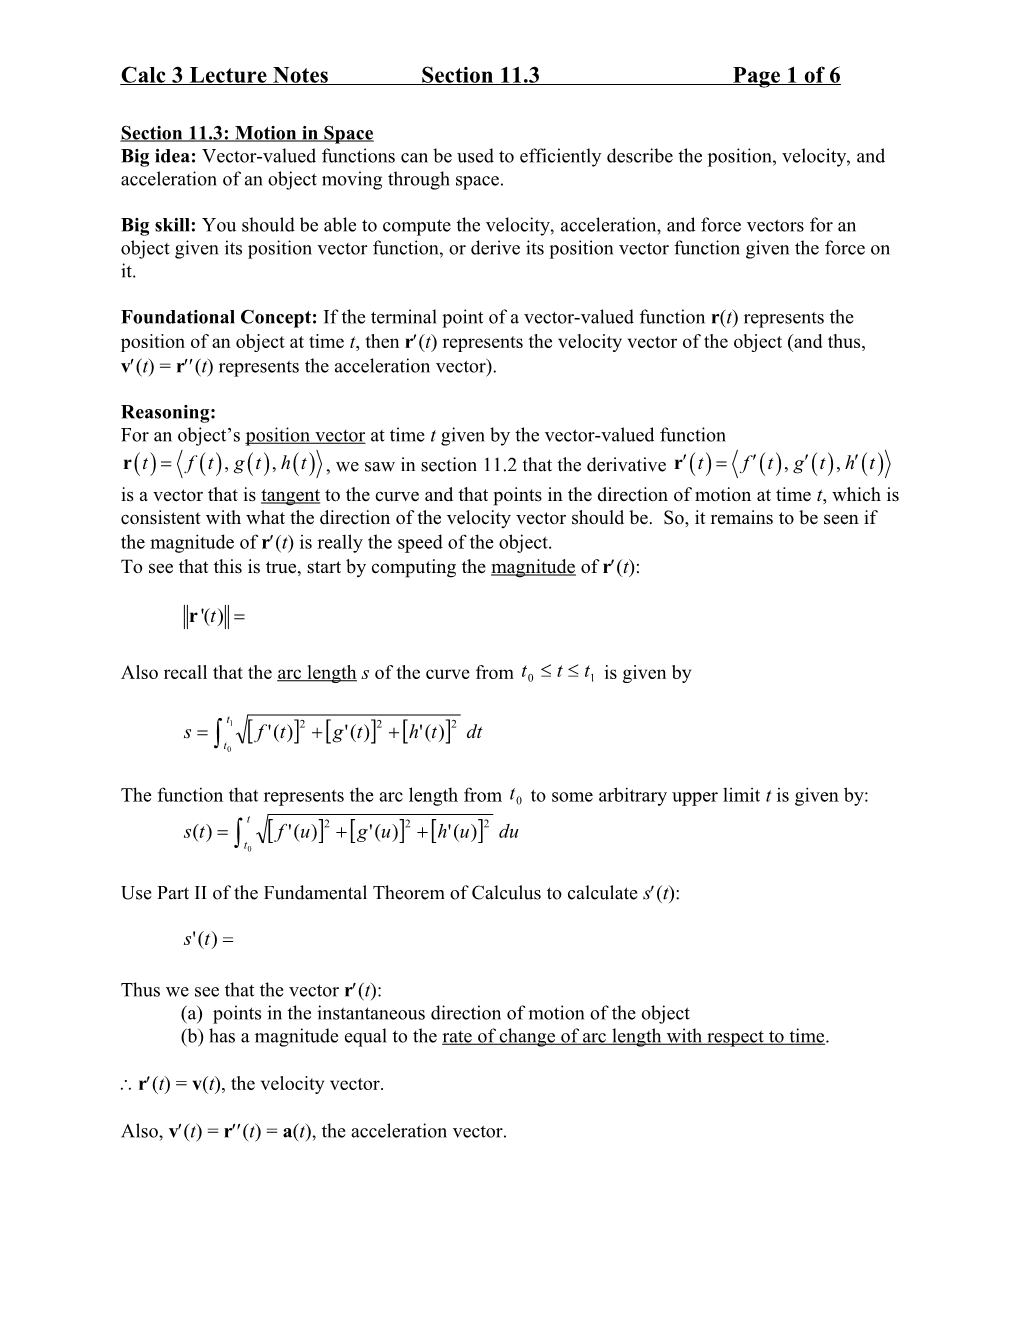 Calculus 3 Lecture Notes, Section 11.3